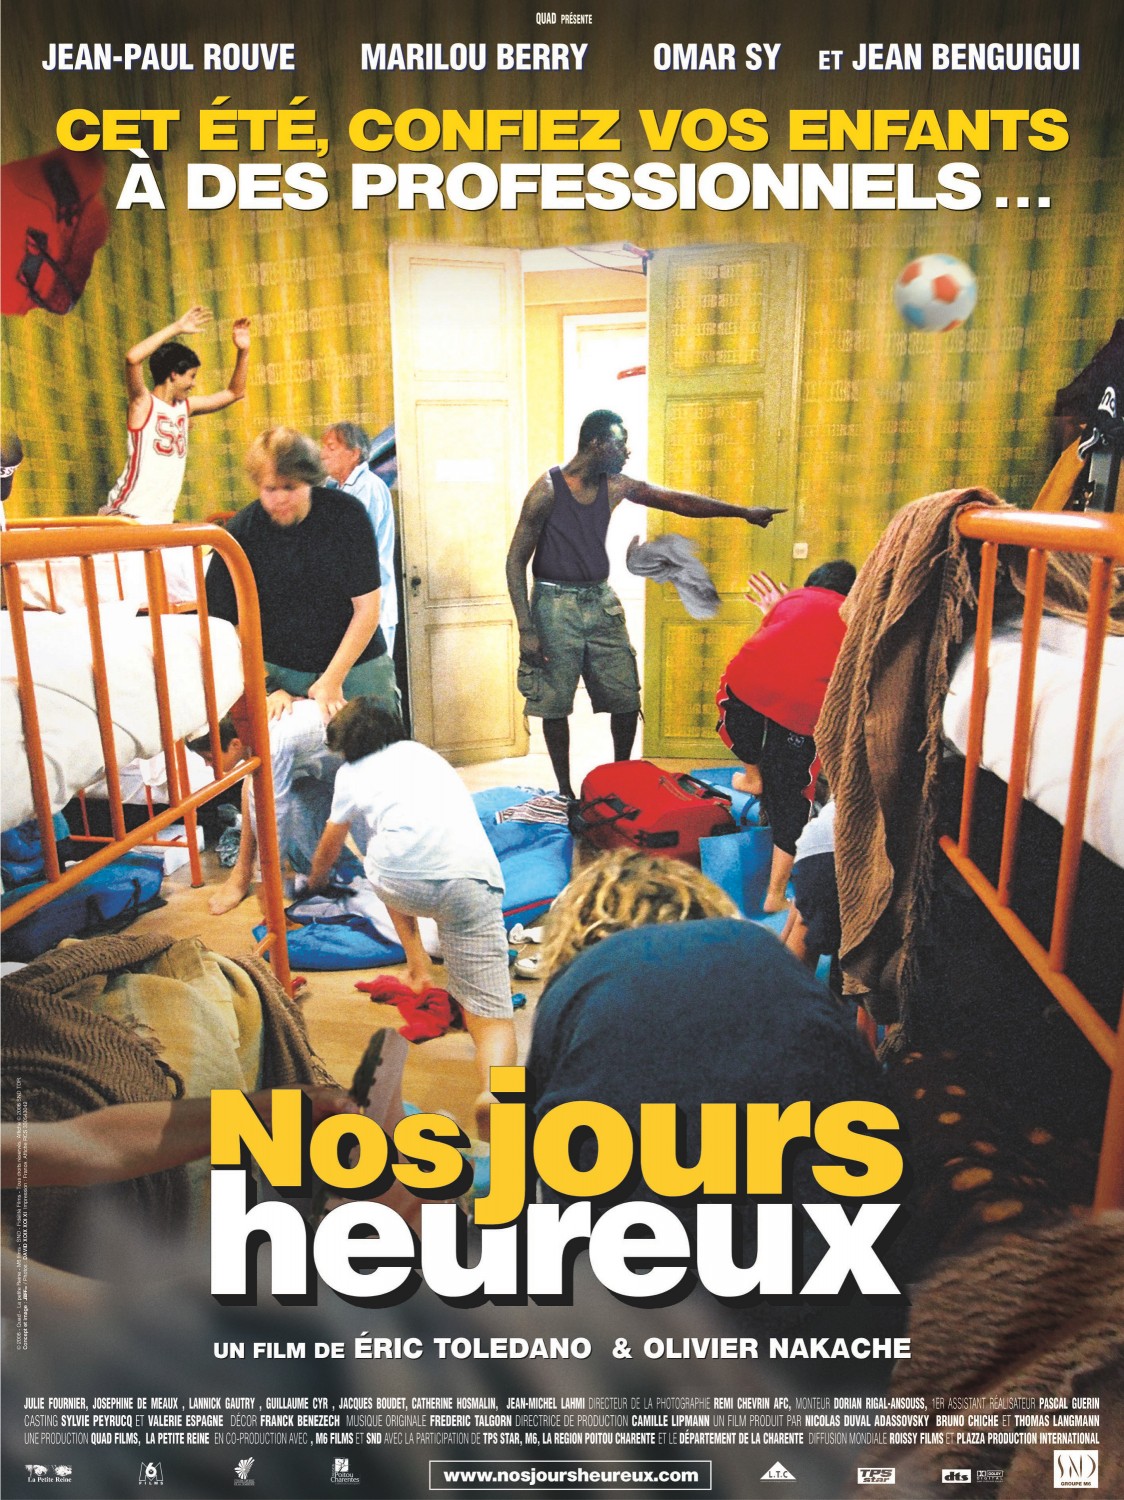 Extra Large Movie Poster Image for Nos jours heureux (#2 of 2)